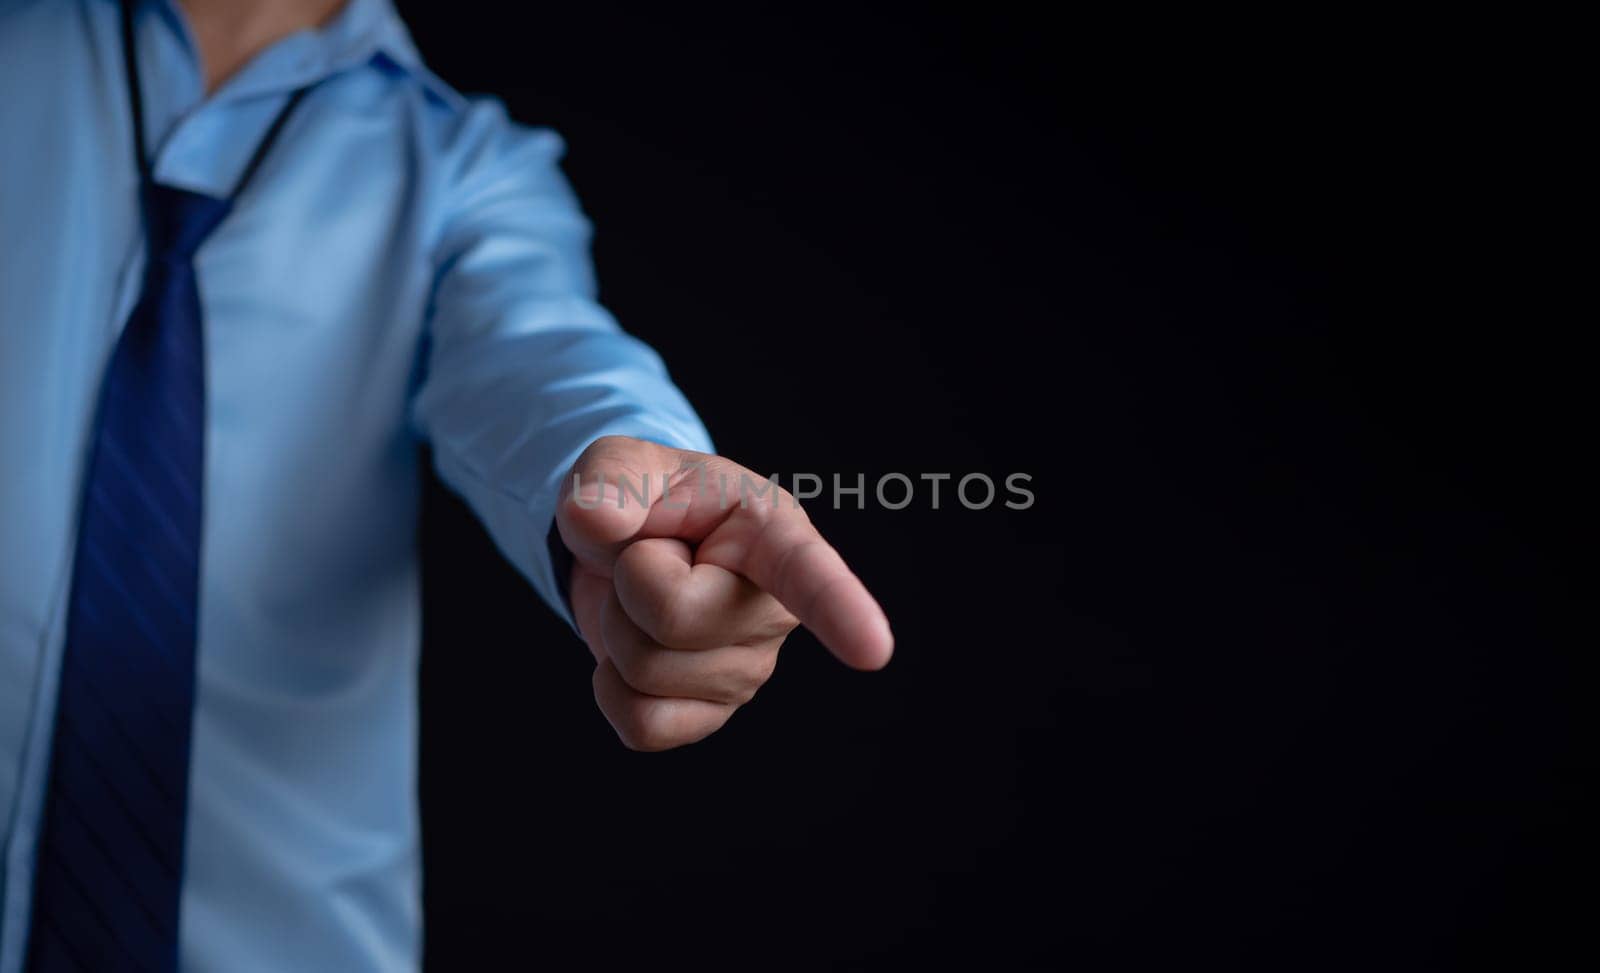 Employee makes a forward pointing gesture on a dark background.